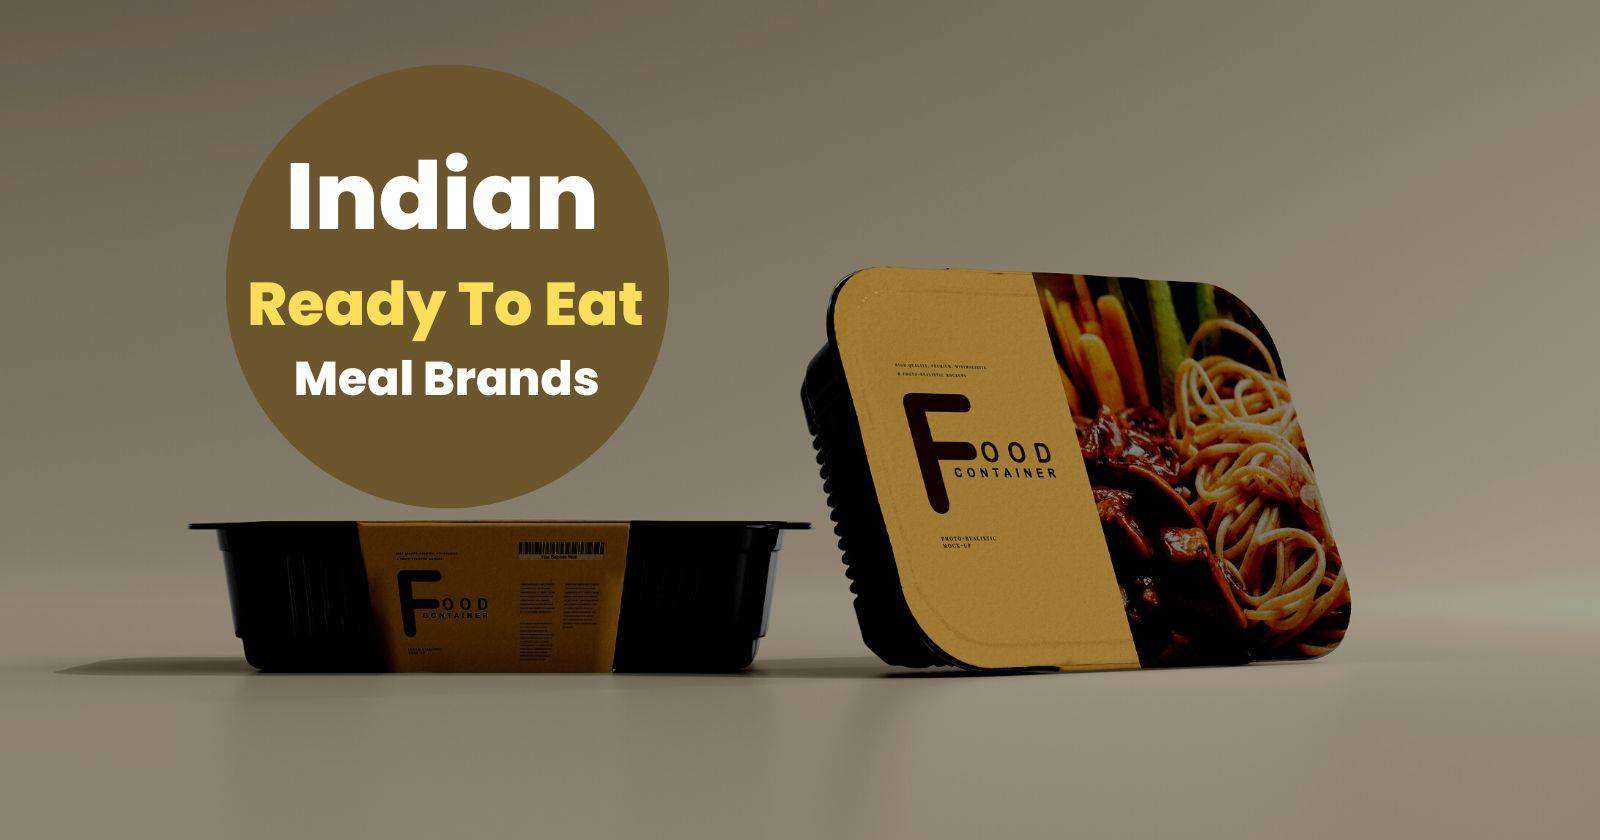 Indian Ready To Eat Meal Brands